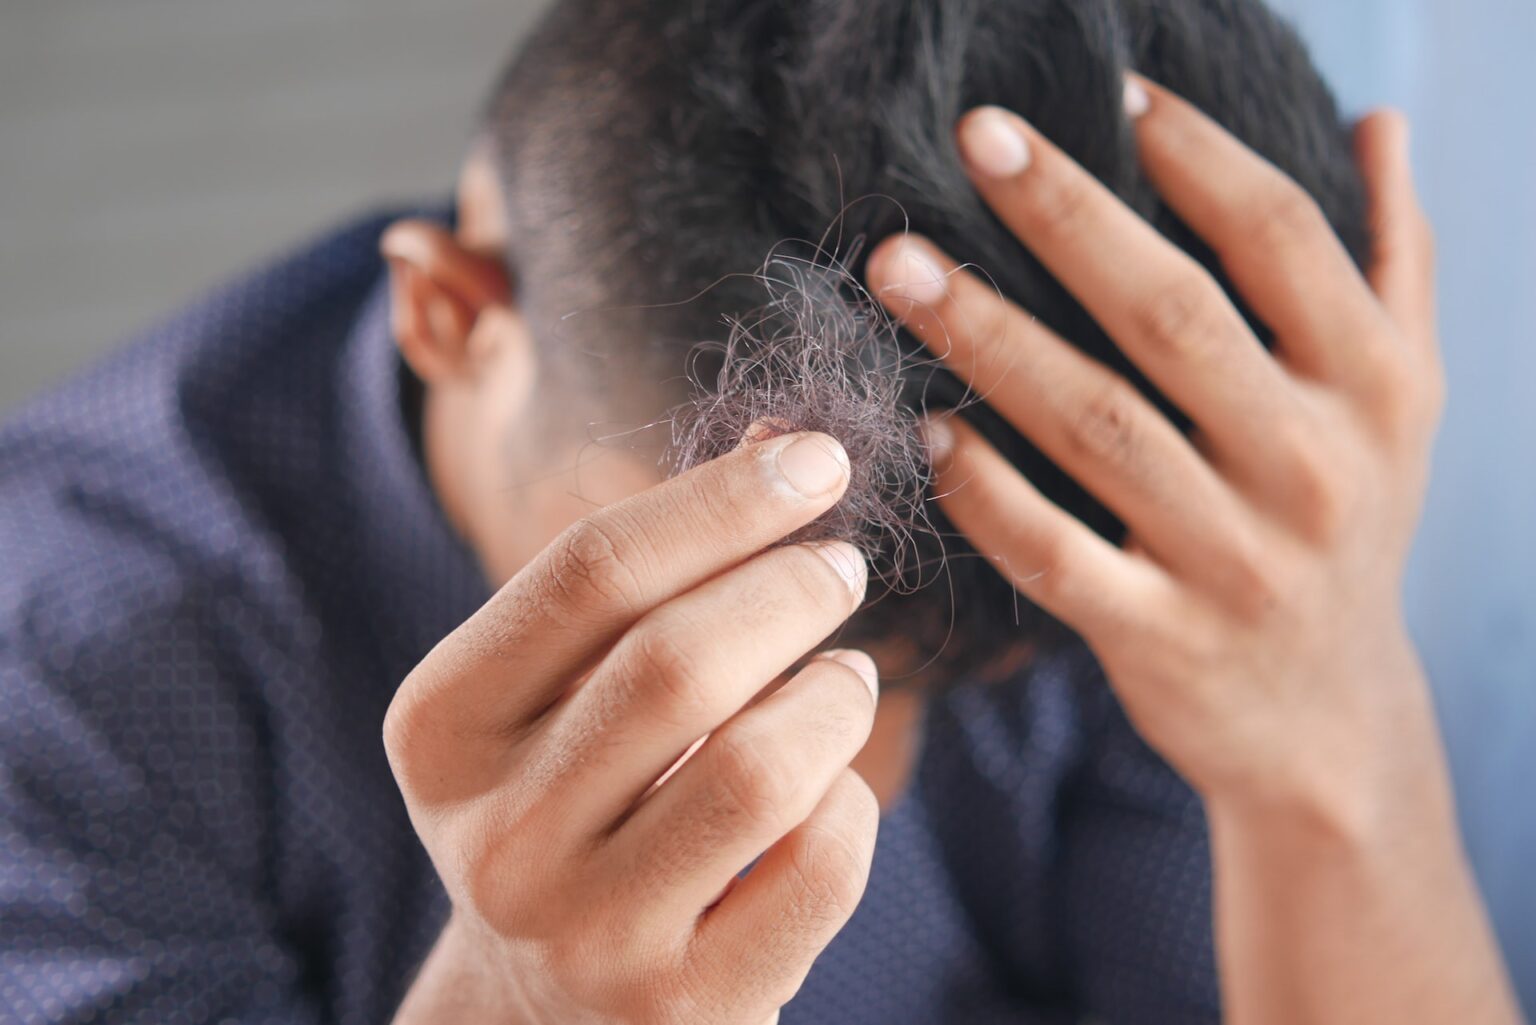 Alopecia, also known as hair loss, is a condition that affects millions of people worldwide. However, what causes it? Learn more in this article!